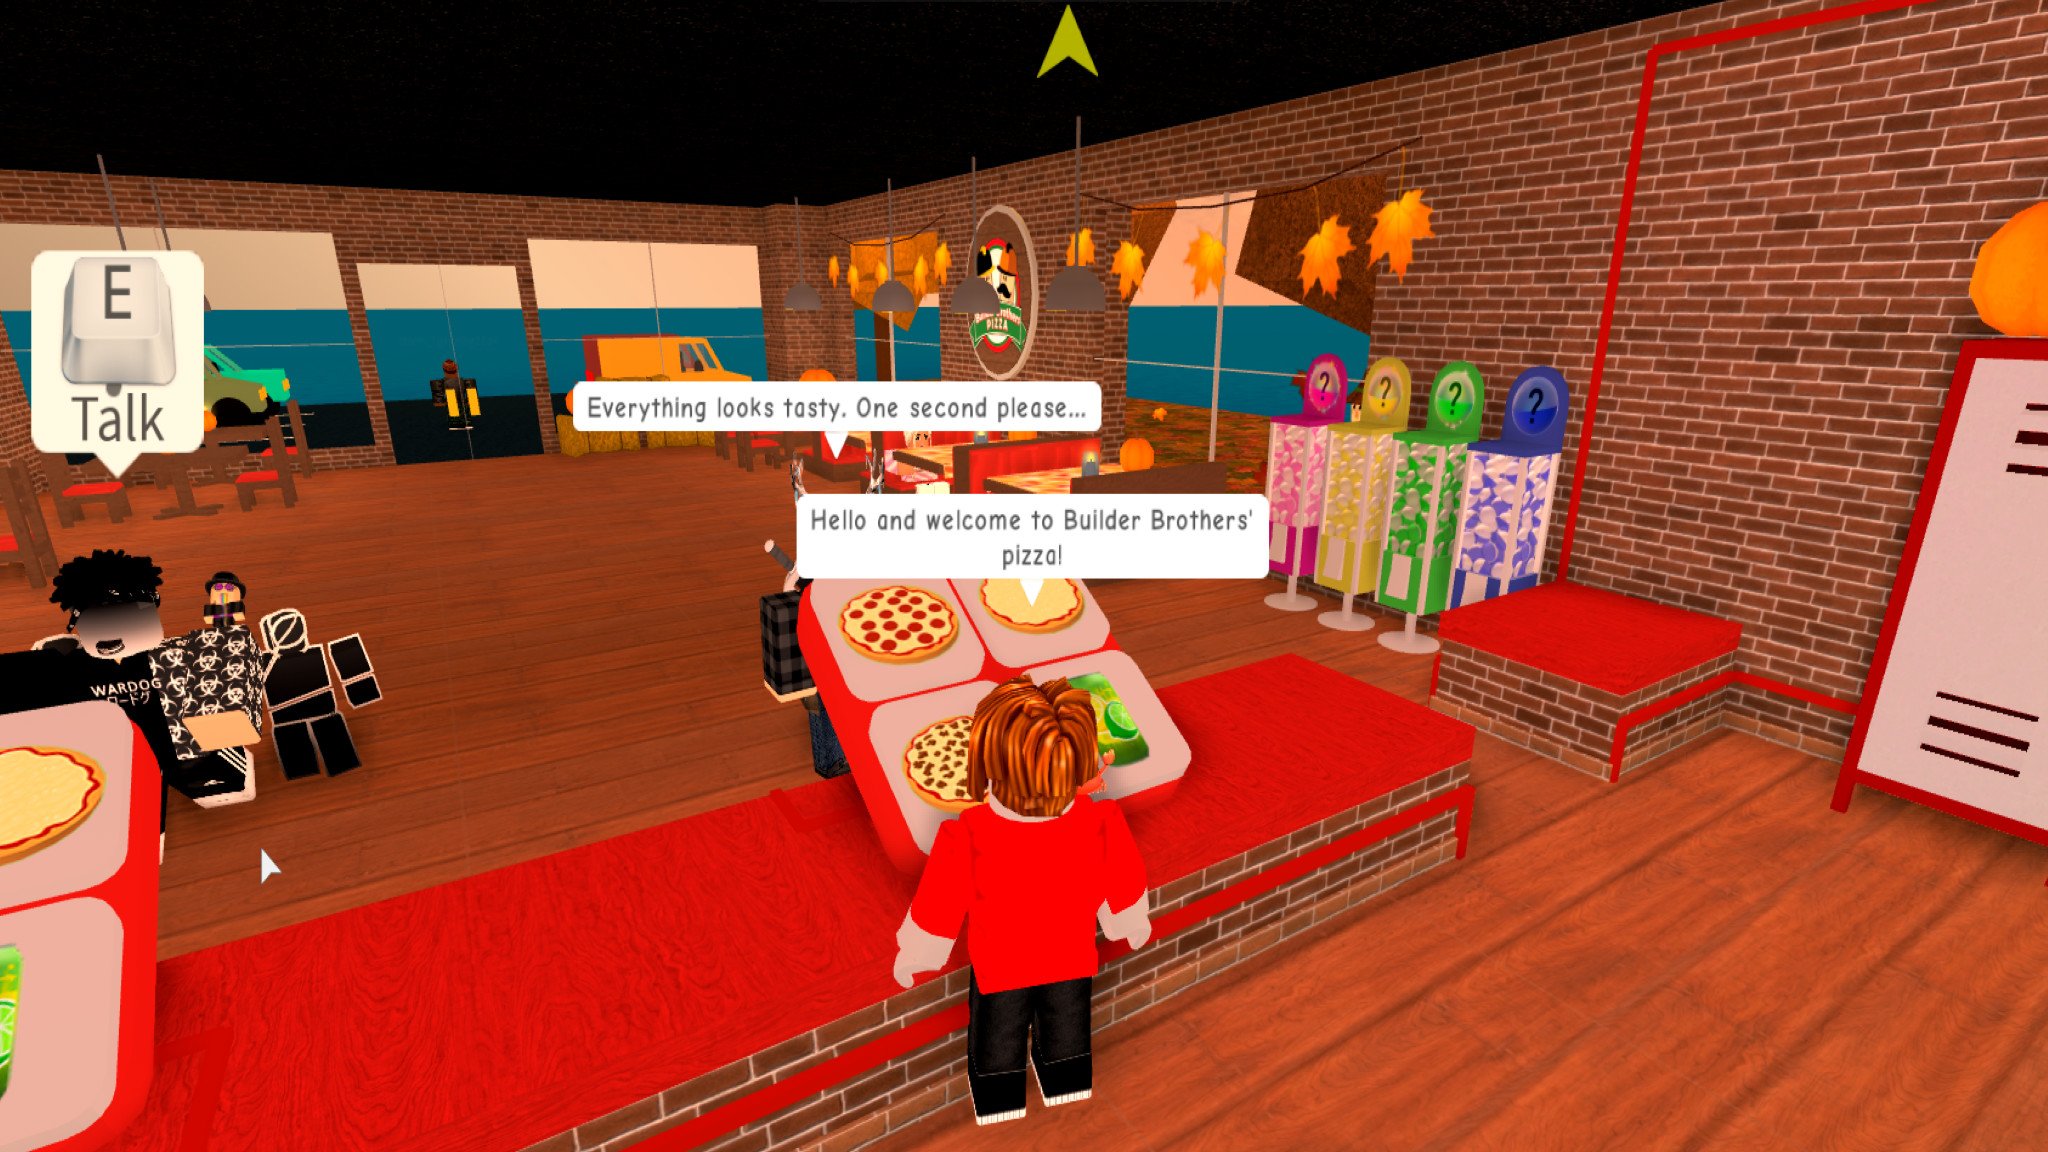 Vayus5mclrl2jm - roblox how to do the pizza event